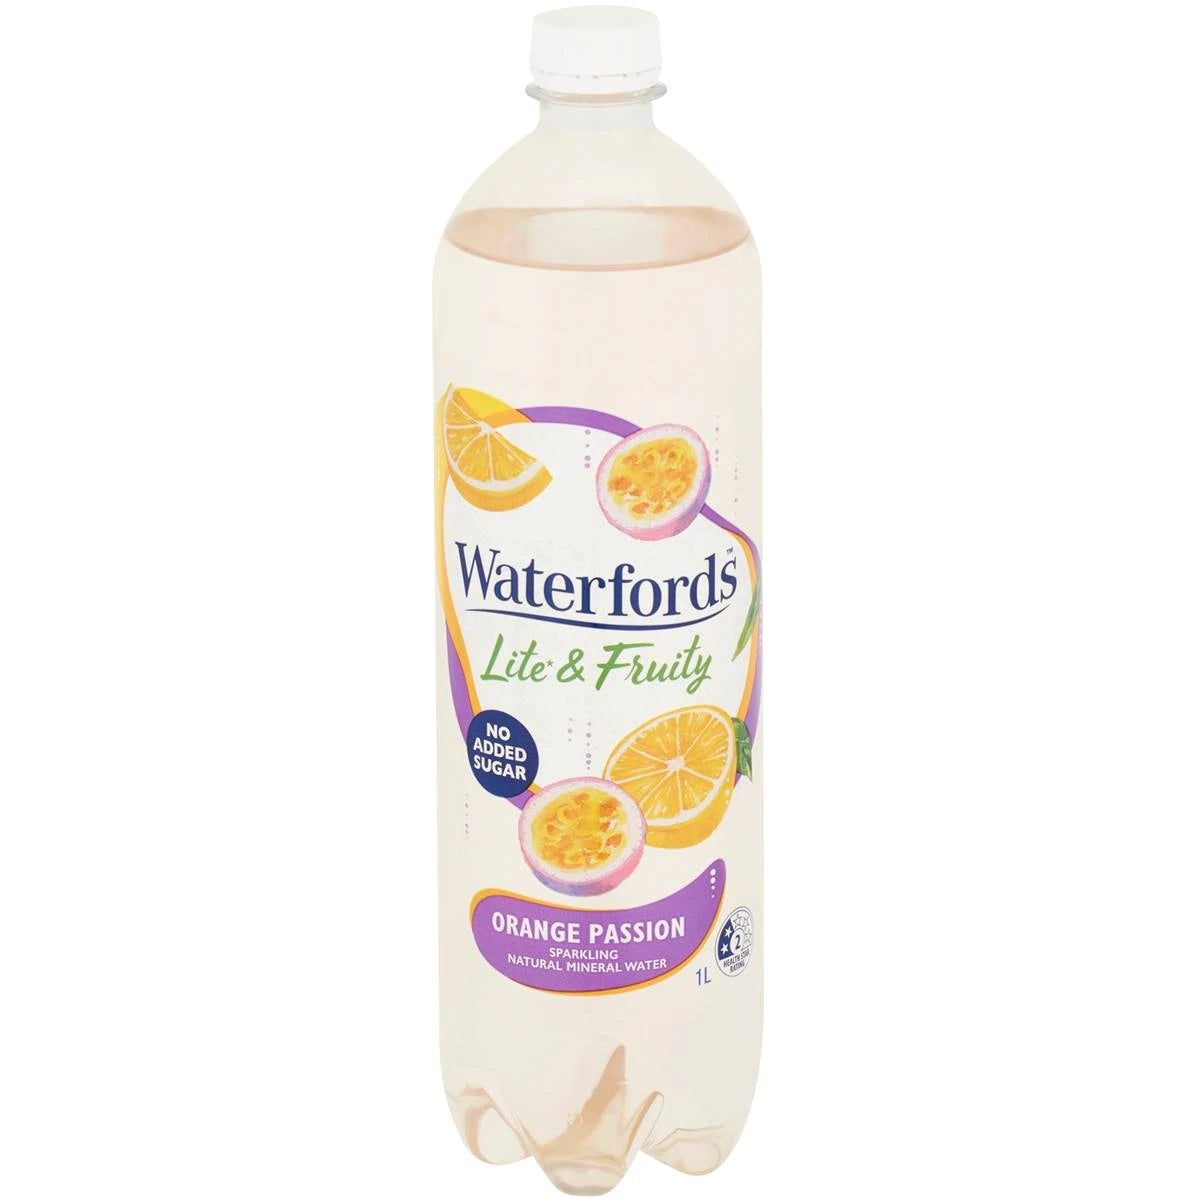 Waterfords Sparkling Mineral Water Orange Passionfruit 1L